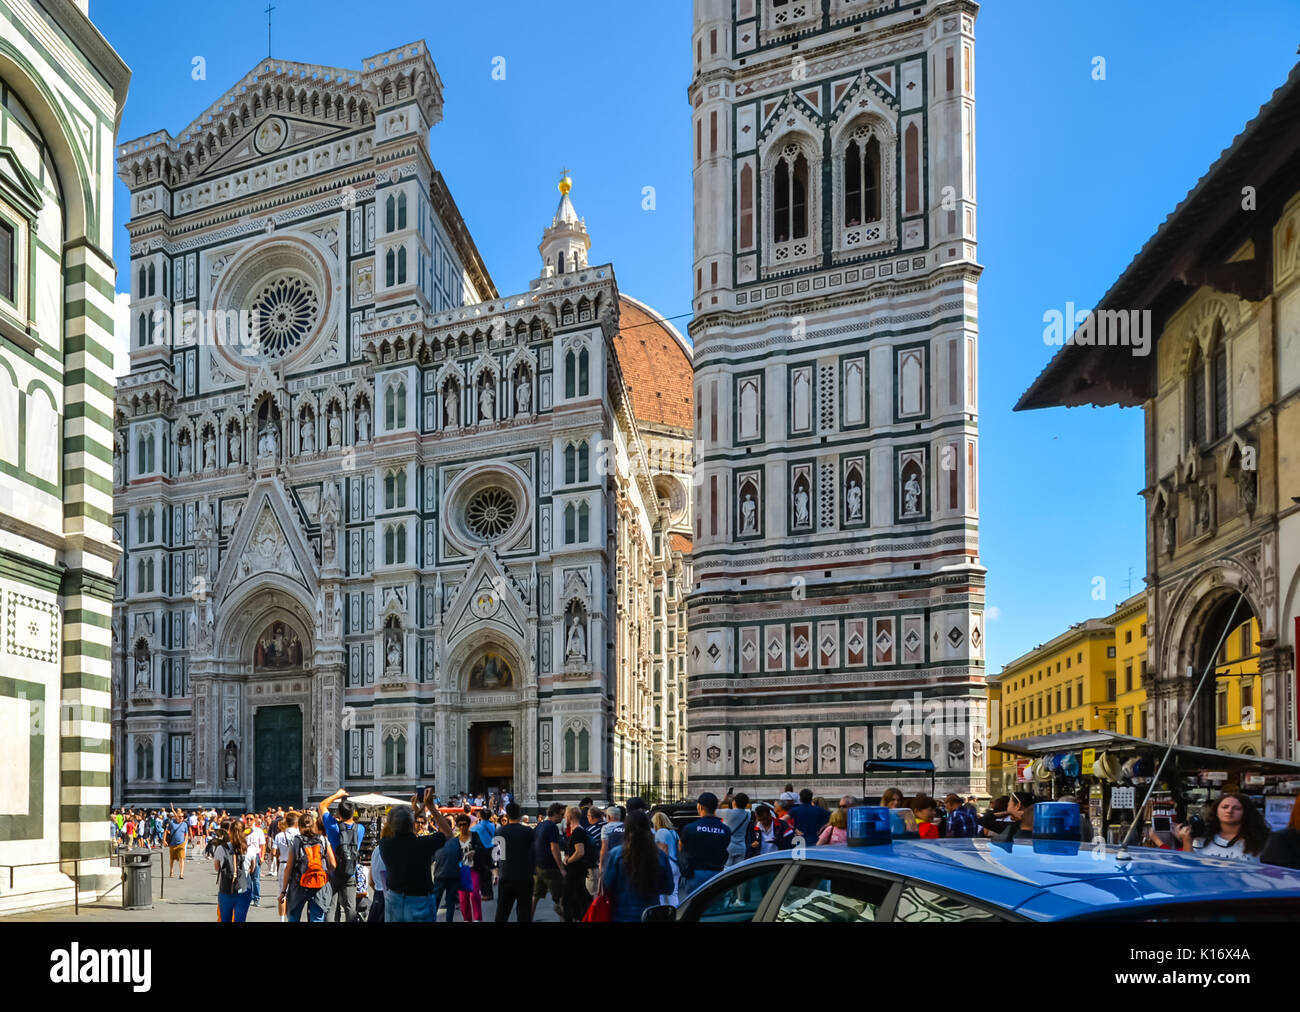 The Piazza del Duomo at the historic center of Florence Italy with the Florence Cathedral, Giotto's Campanile or Bell Tower and the Baptistery Stock Photo